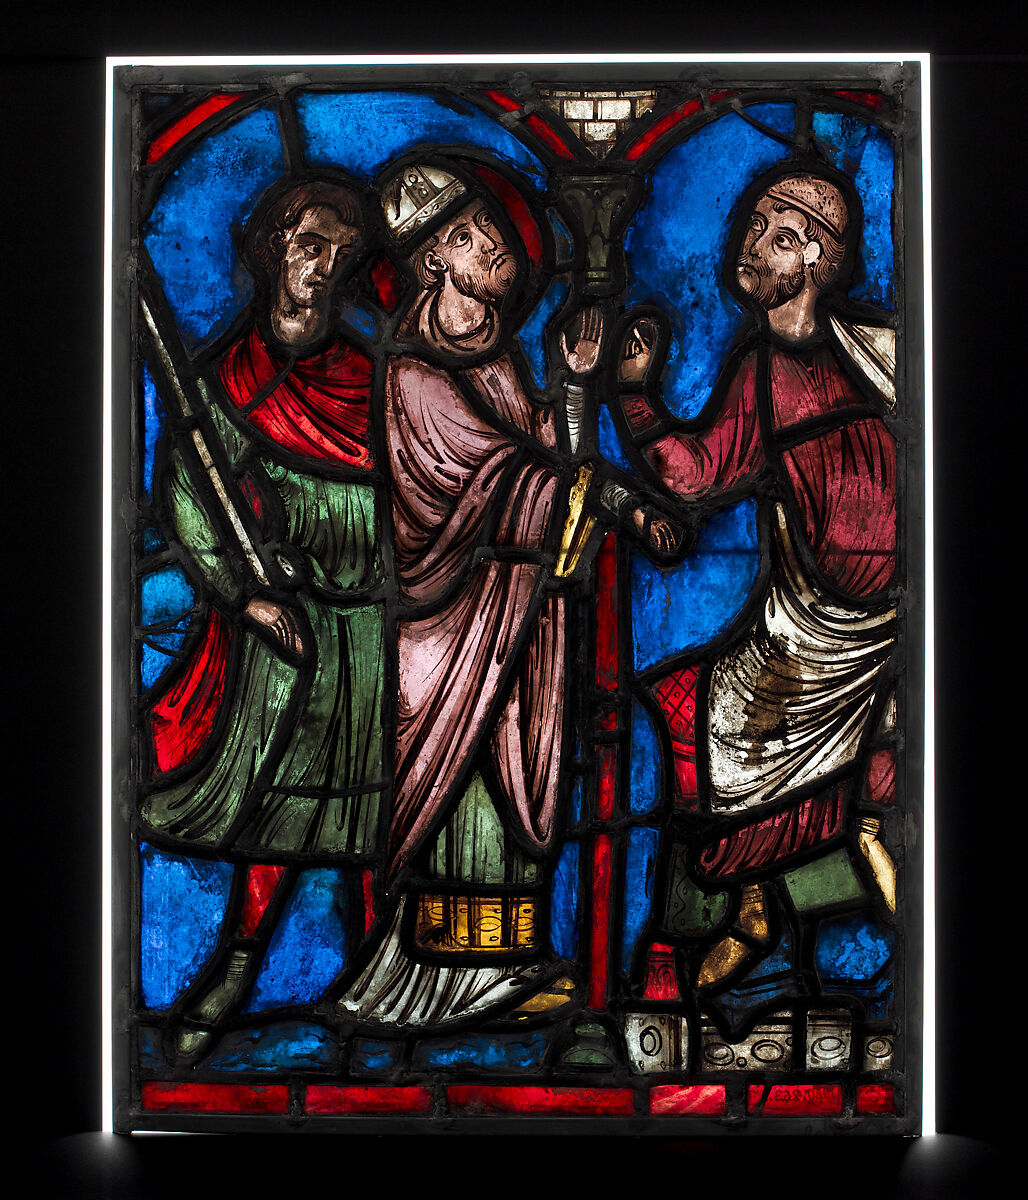 Saint Nicholas Accuses the Consul from Scenes from the Life of Saint Nicholas, Pot-metal glass and vitreous paint, French 